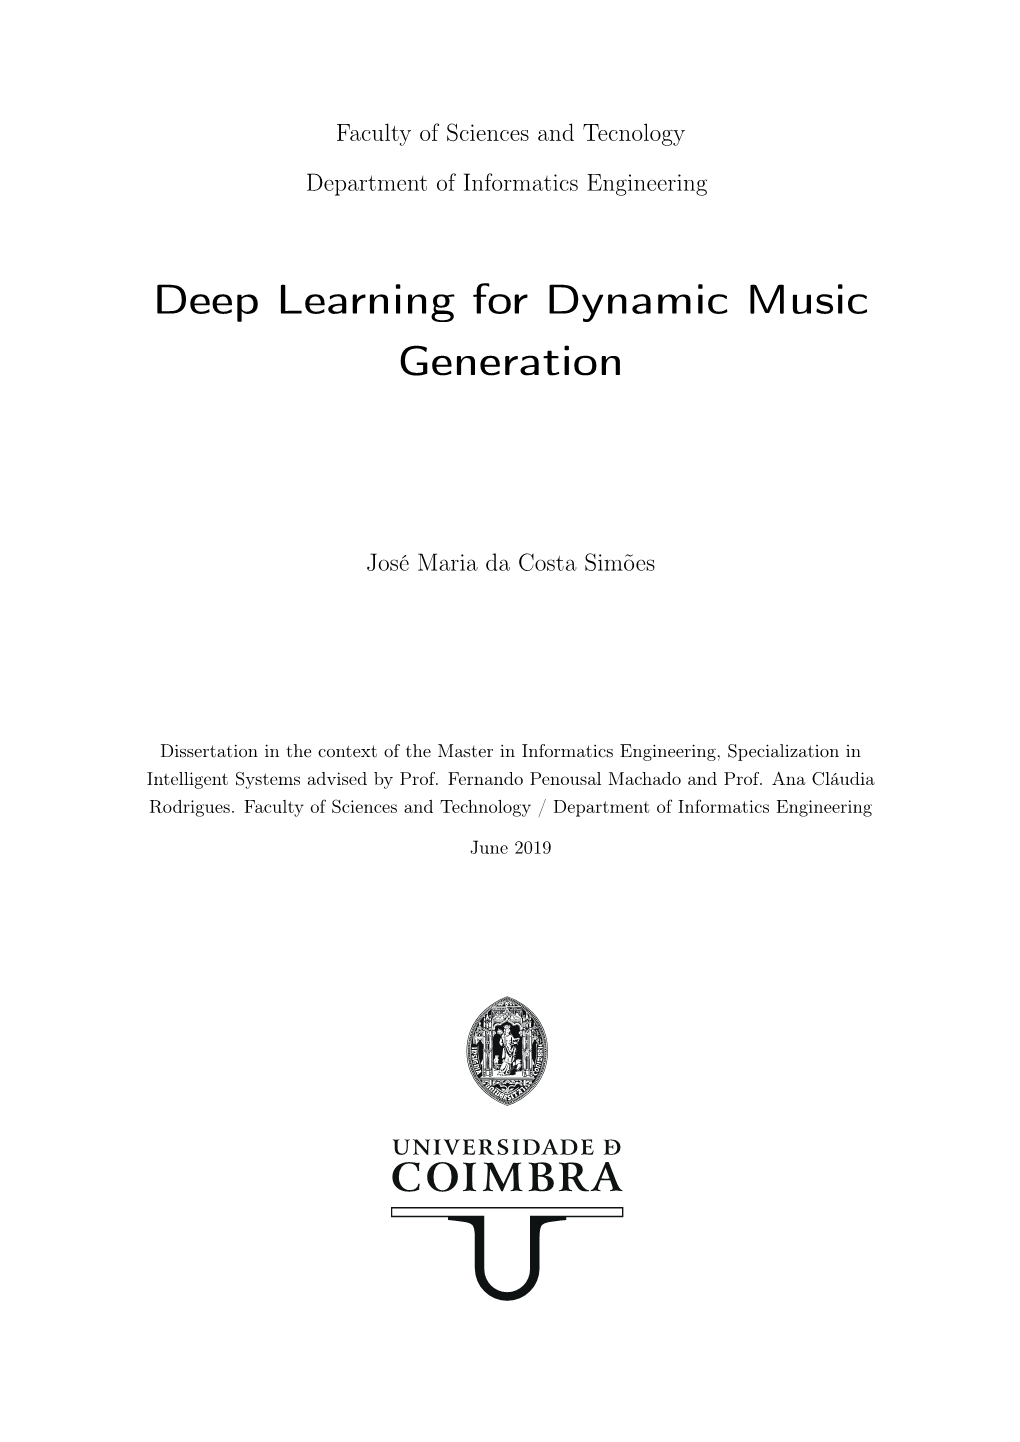 Deep Learning for Dynamic Music Generation